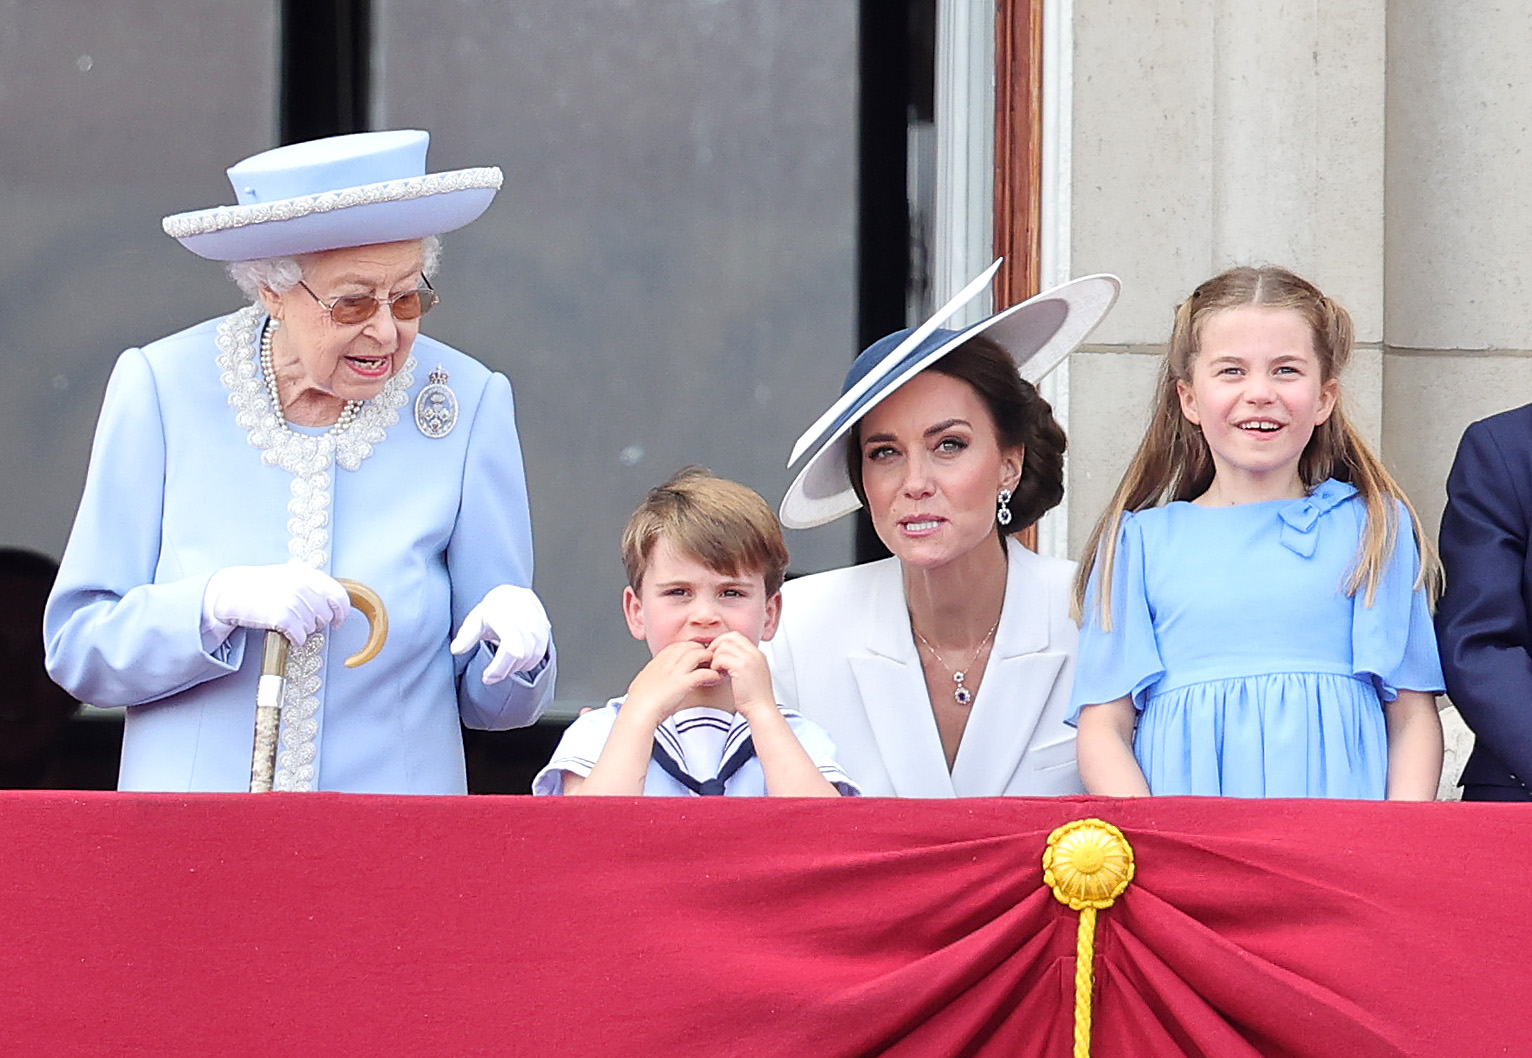 Queen Elizabeth II, Prince Louis, Princess Catherine and Princess Charlotte during Trooping The Colour in London, England on June 2, 2022 | Source: Getty Images